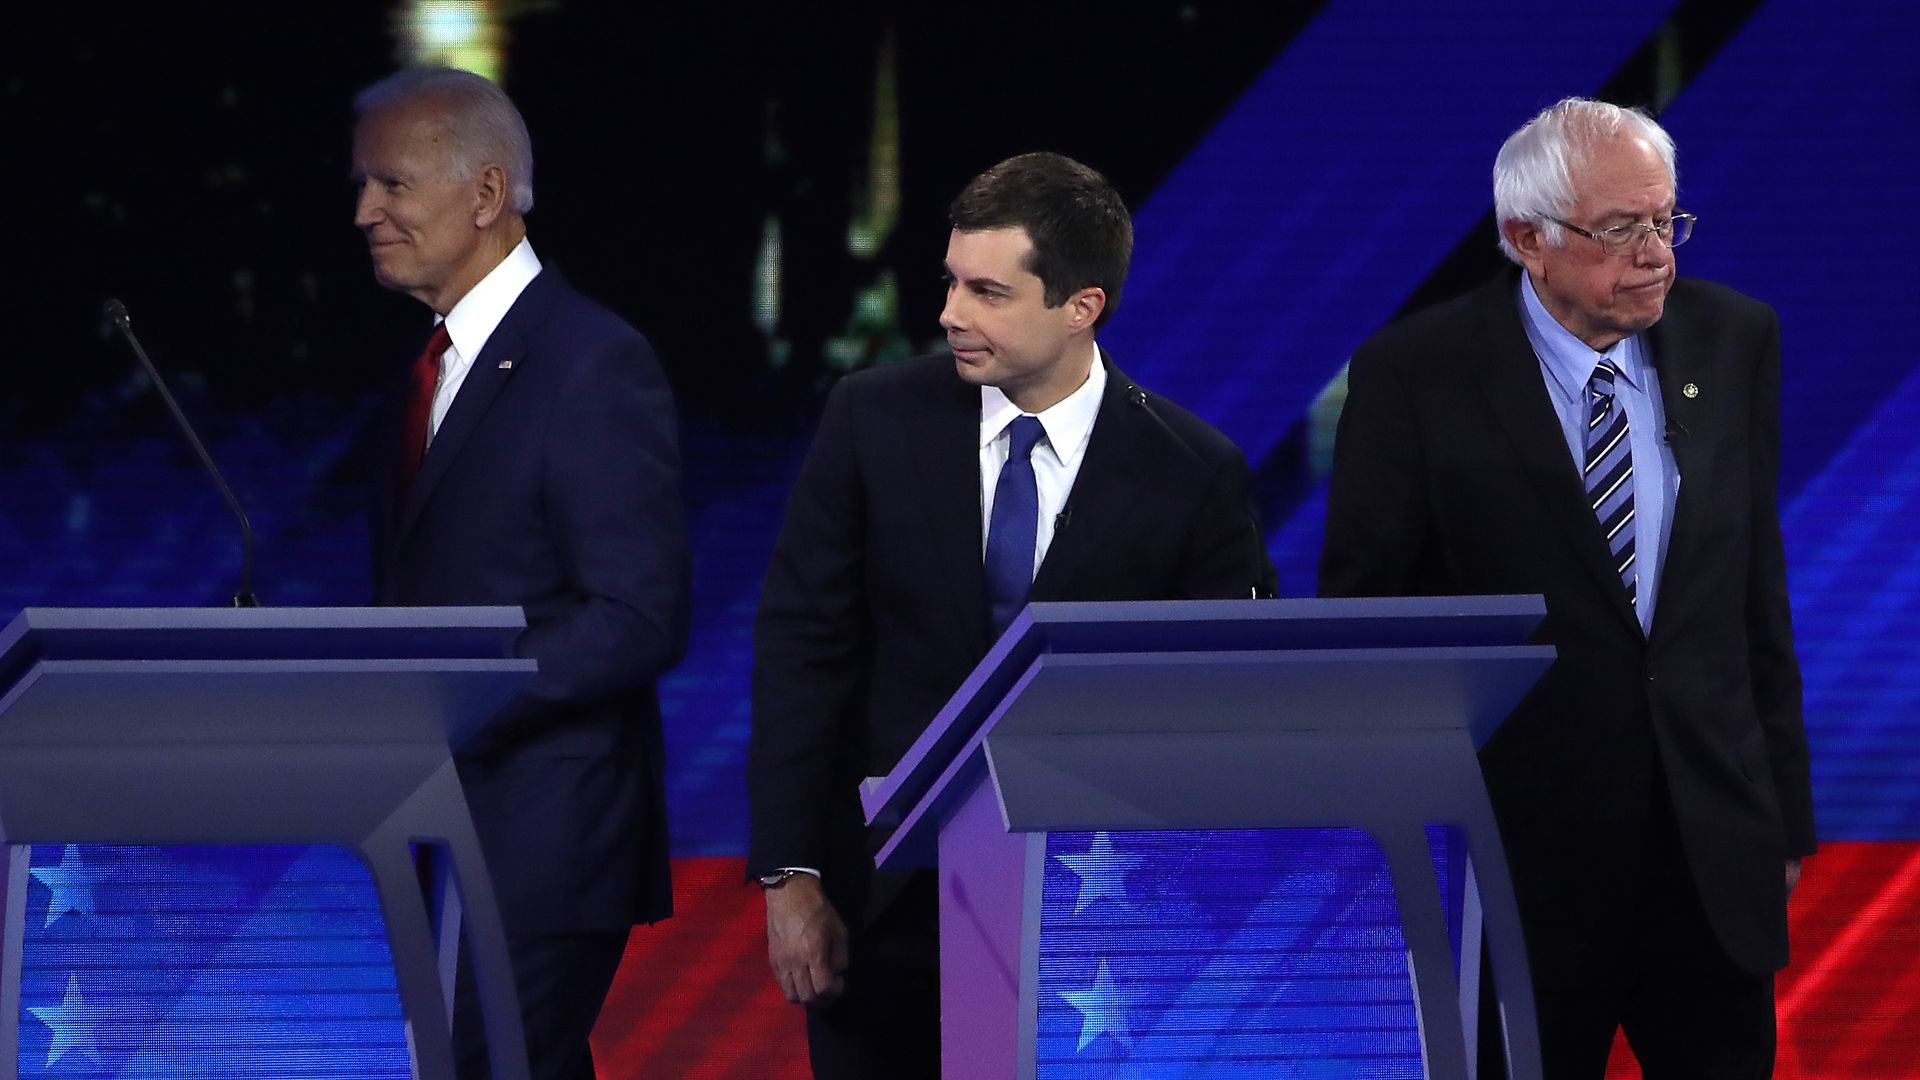 In this image, Biden and Buttigieg stand next to each other on the debate stage, with Sanders standing nearby.